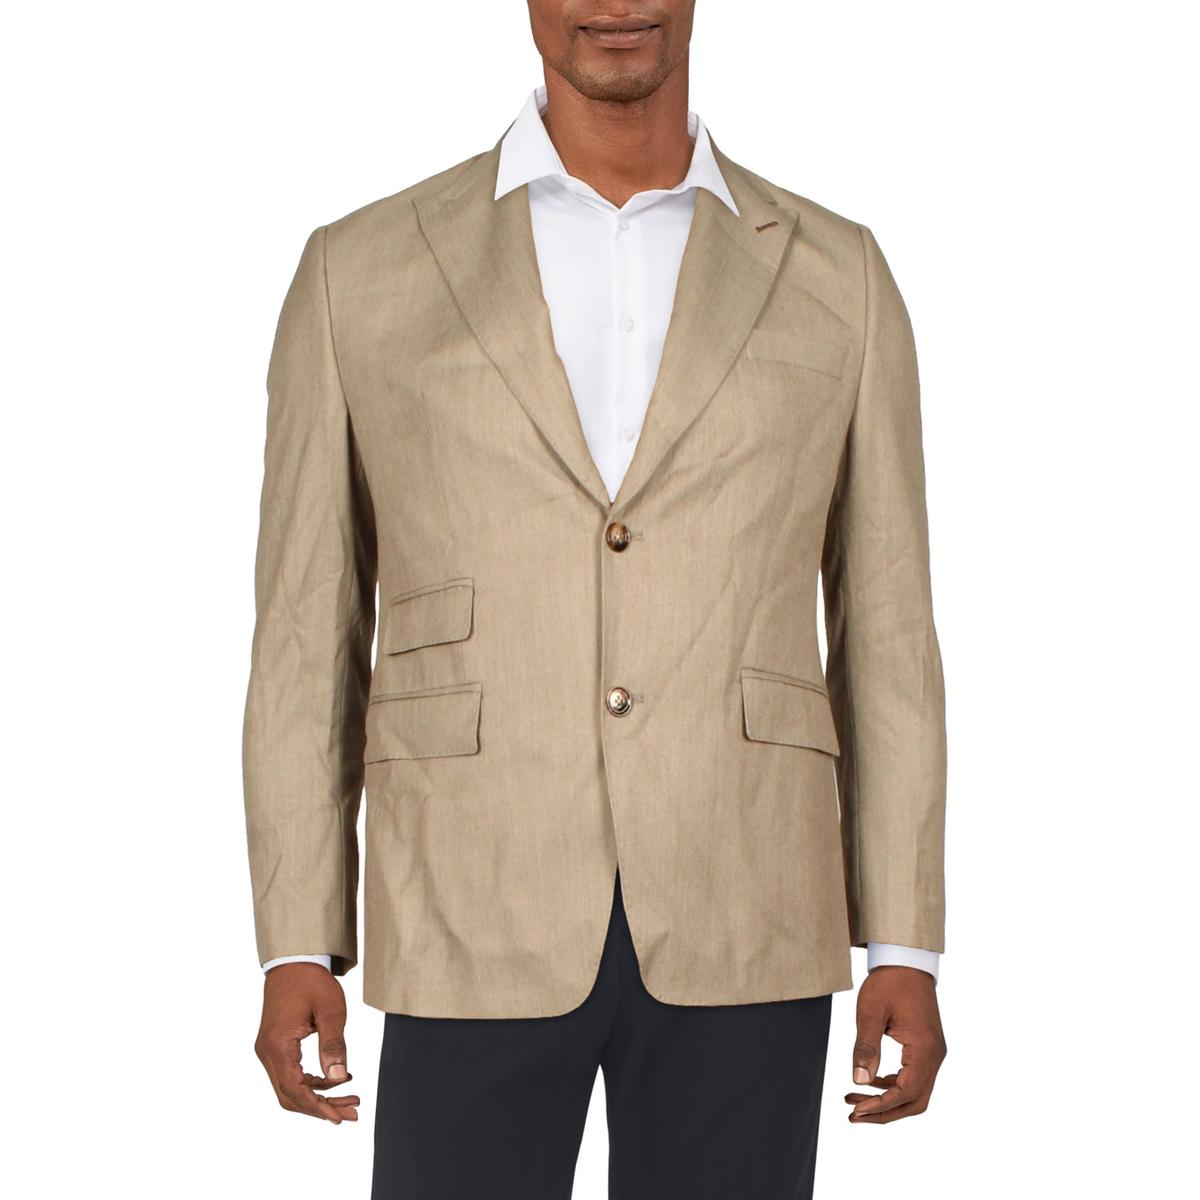 TAYION BY MONTEE HOLLAND Mens Wool Blend Classic Fit Suit Jacket